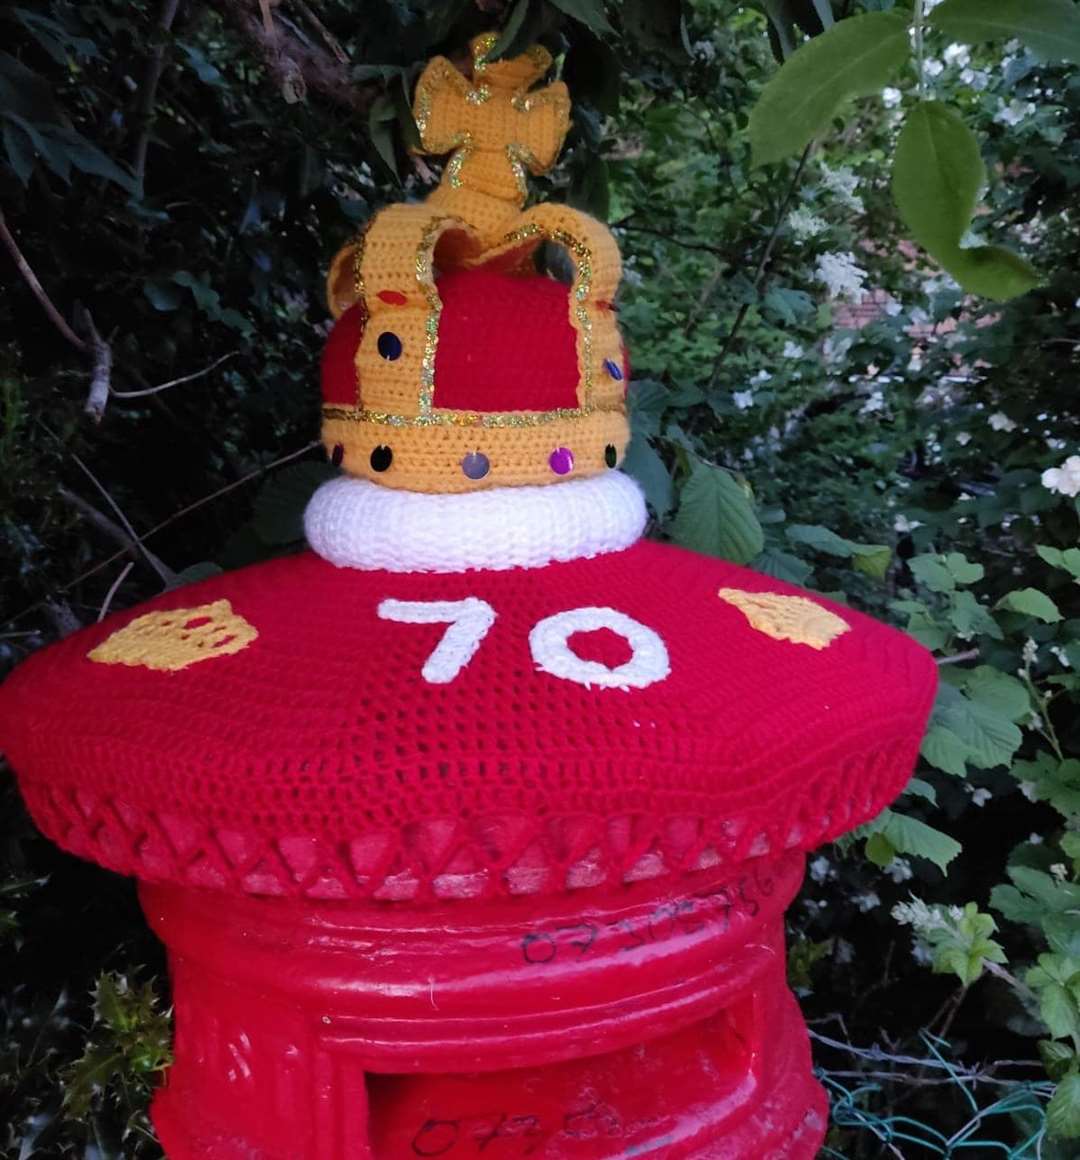 A Jubilee post box topper made by Cheryl Higgins was stolen and set on fire